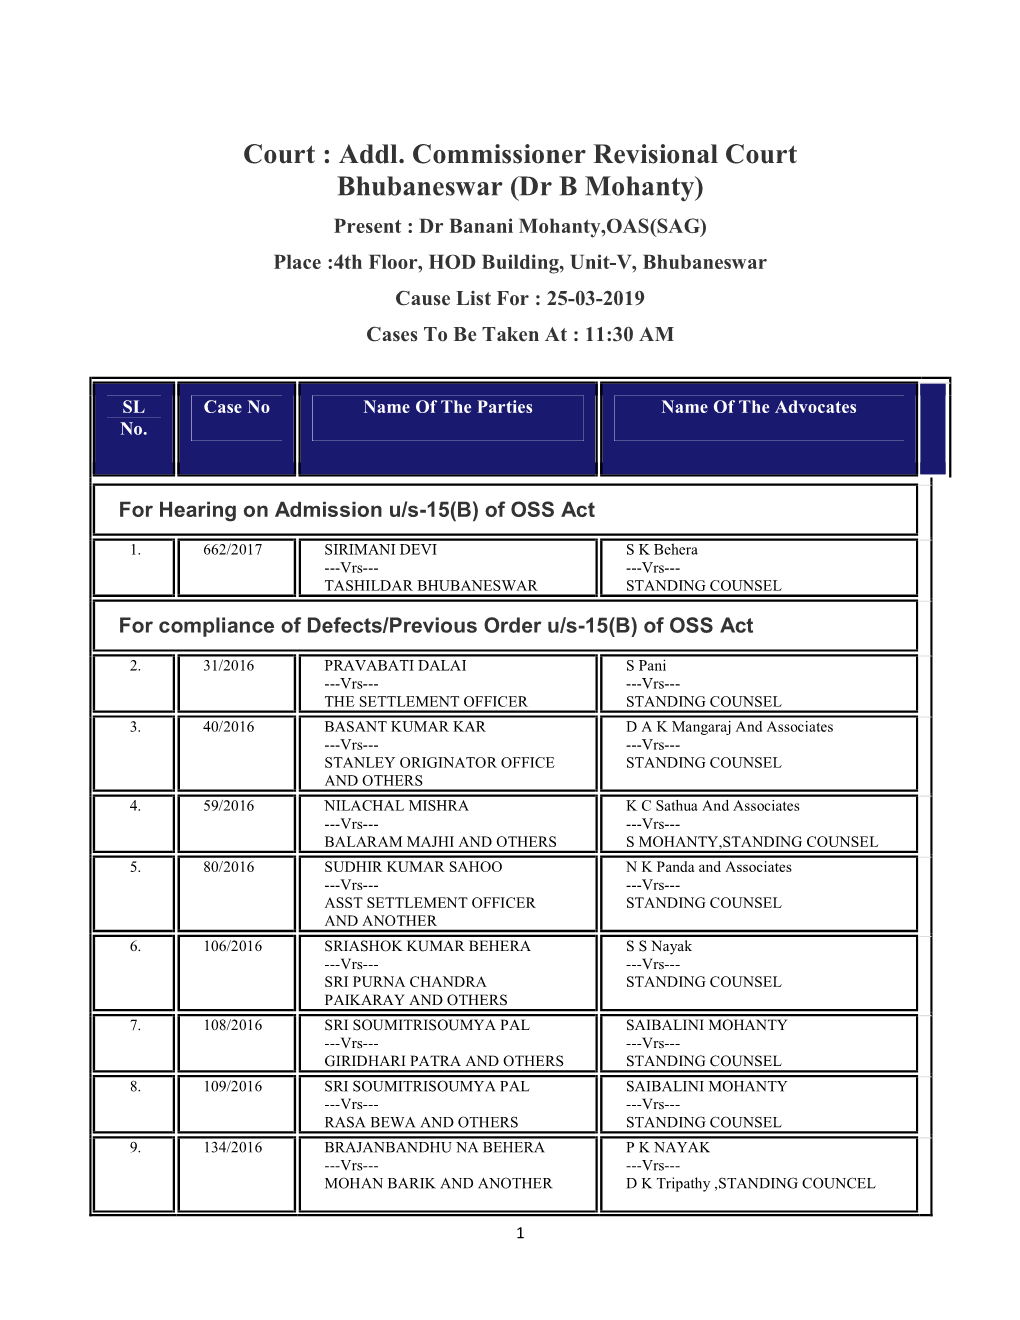 Dr B Mohanty) Present : Dr Banani Mohanty,OAS(SAG) Place :4Th Floor, HOD Building, Unit-V, Bhubaneswar Cause List for : 25-03-2019 Cases to Be Taken at : 11:30 AM